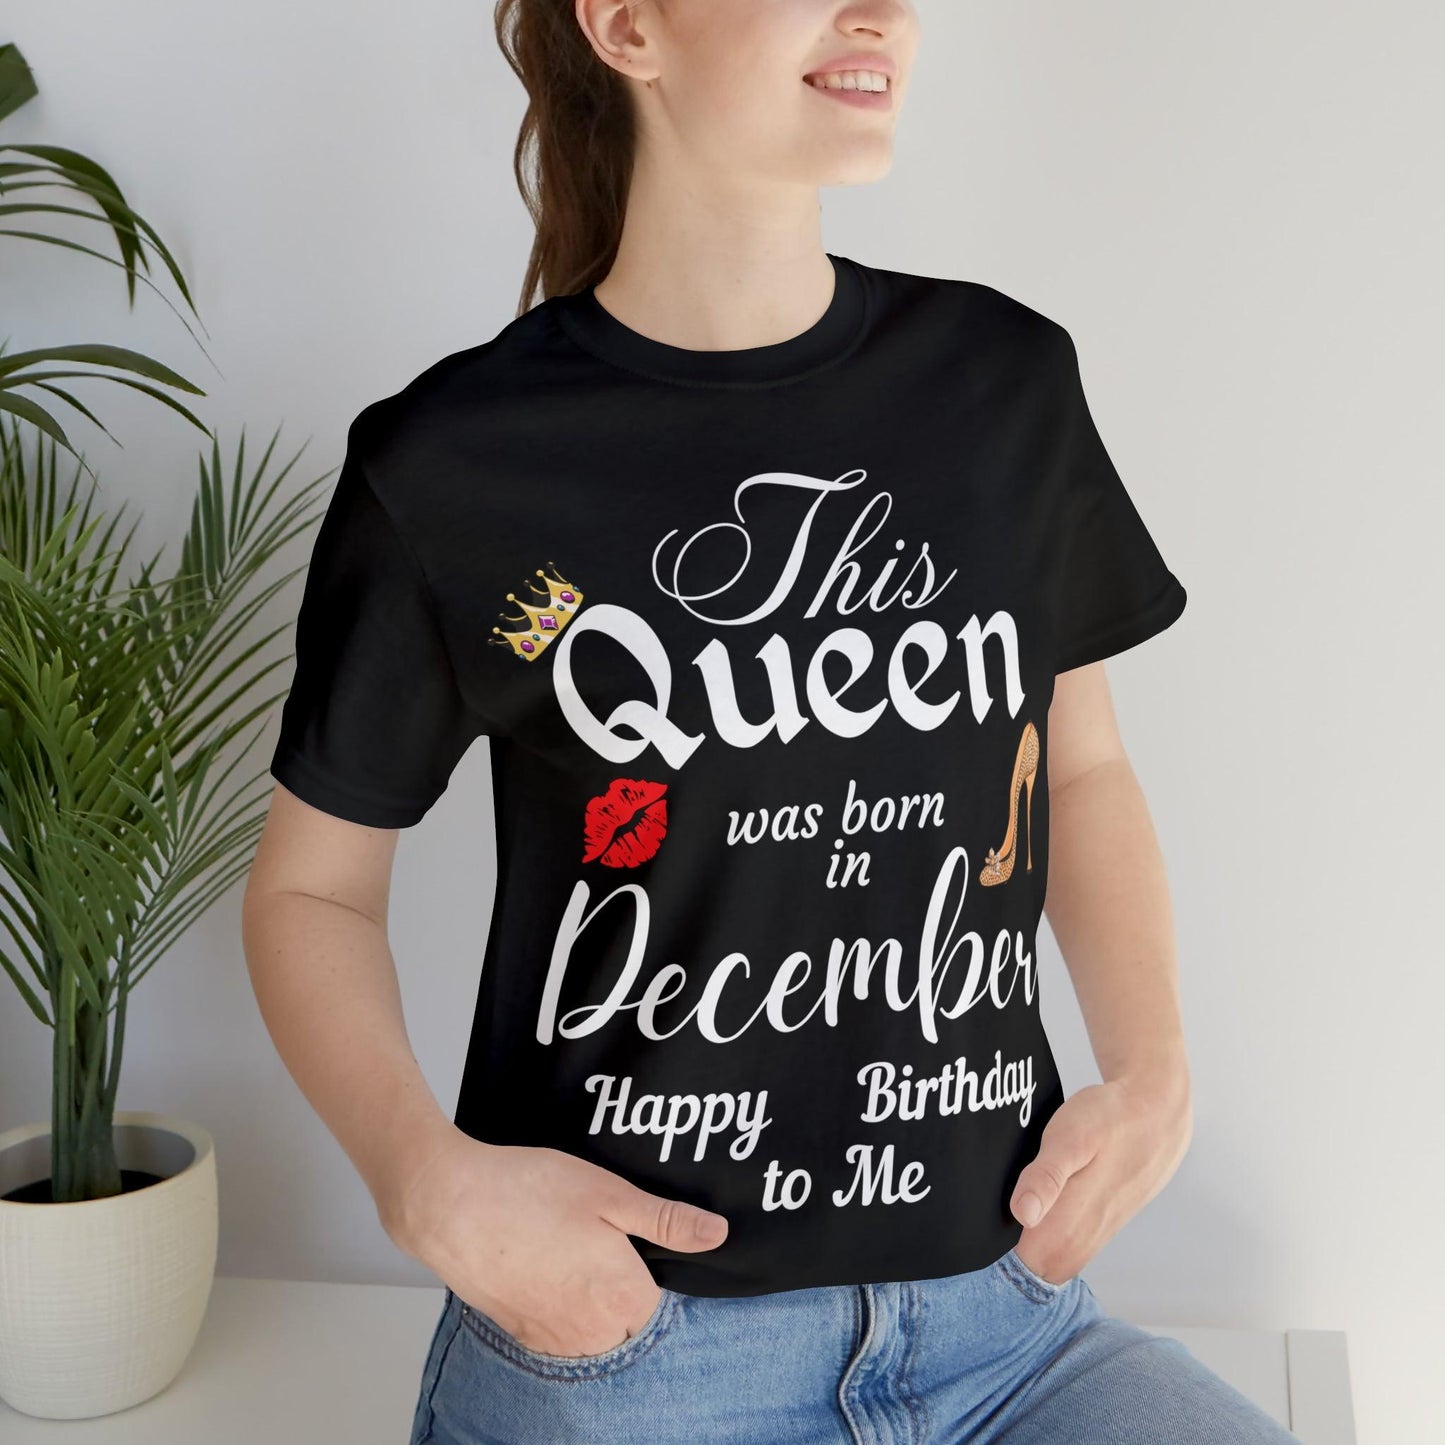 Birthday Queen Shirt, Gift for Birthday, This Queen was born in December Shirt, Funny Queen Shirt, Funny Birthday Shirt, Birthday Gift